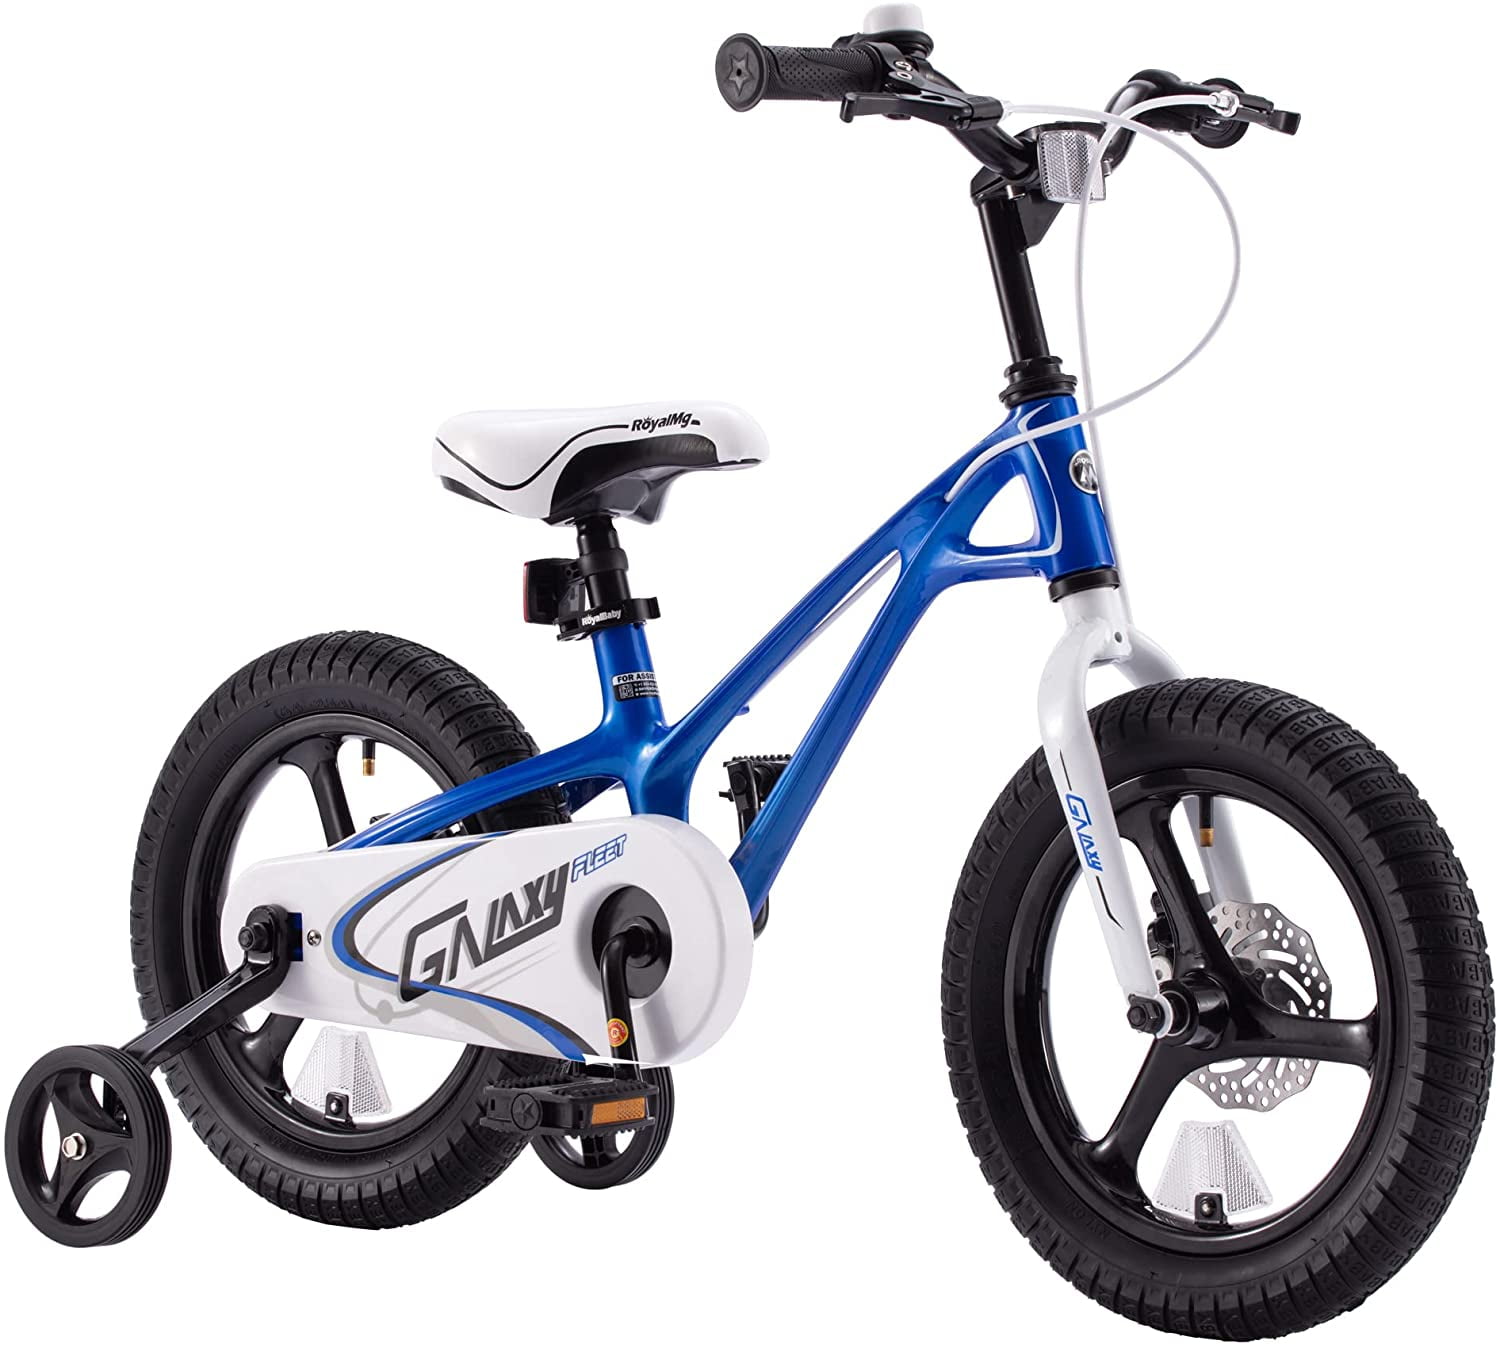 14 16 Inch Kids Bike Removable Stabilisers Childrens Bicycle 12 